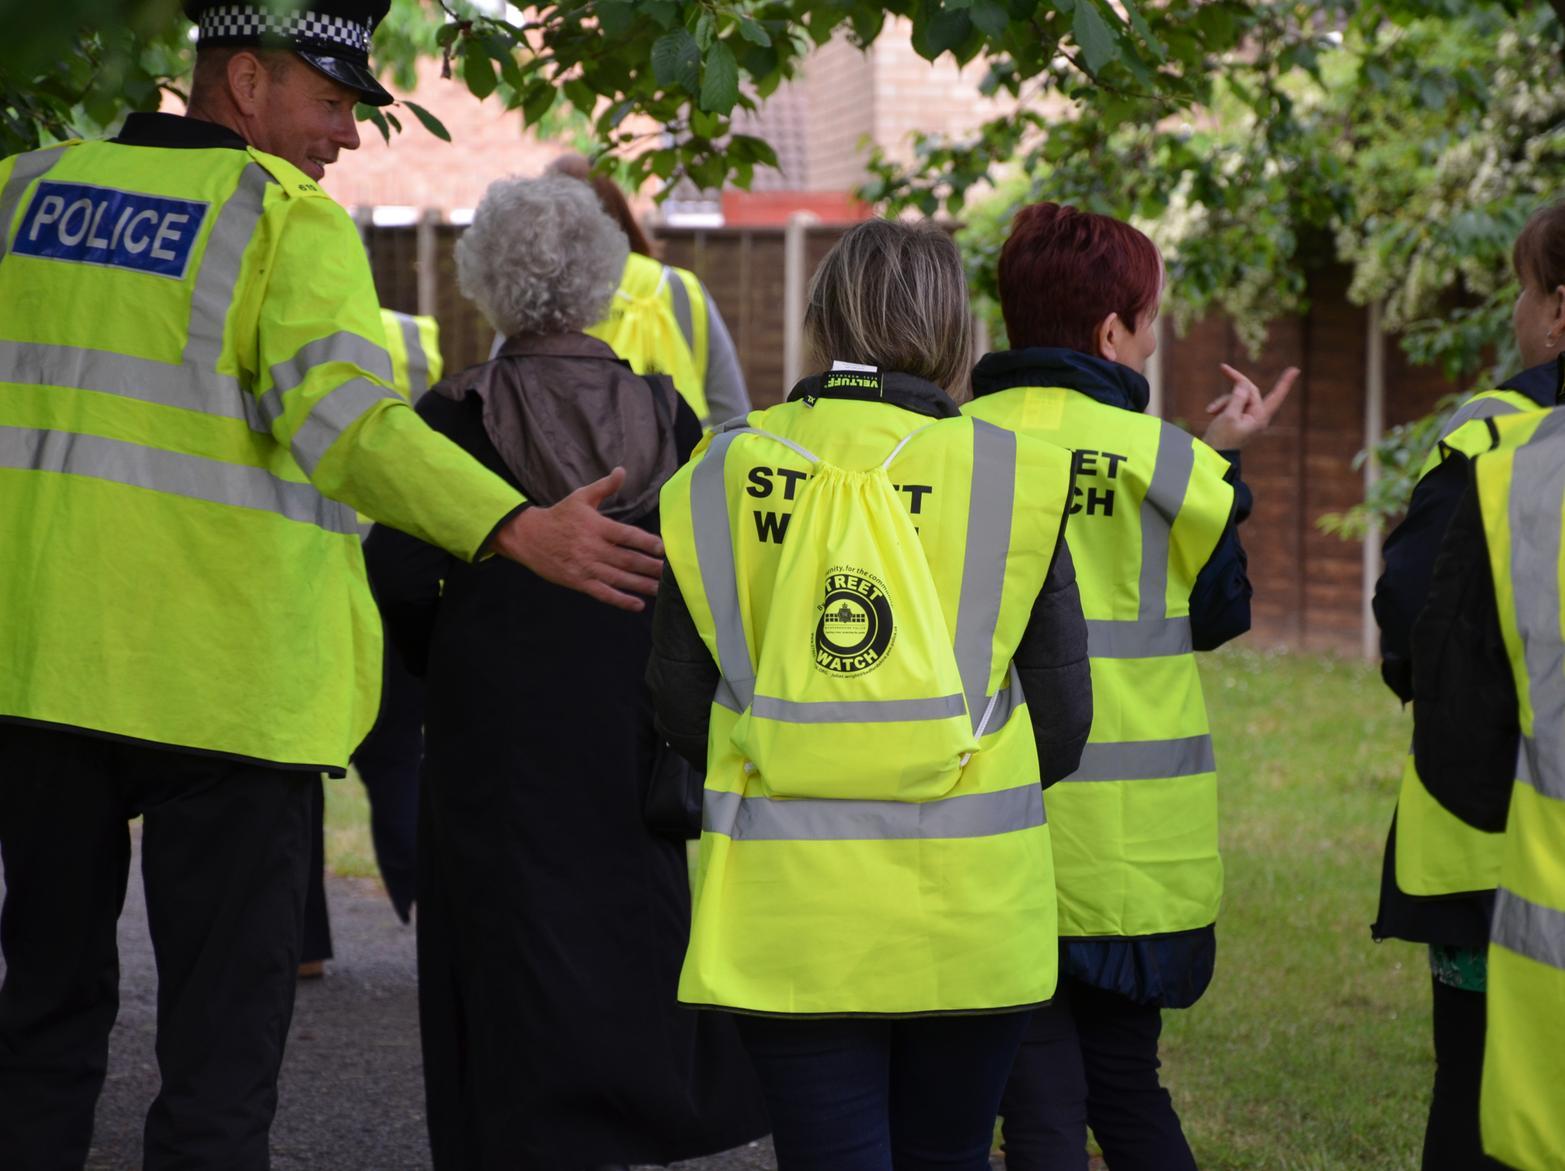 Bedfordshire Police highlights the work of its volunteers ...